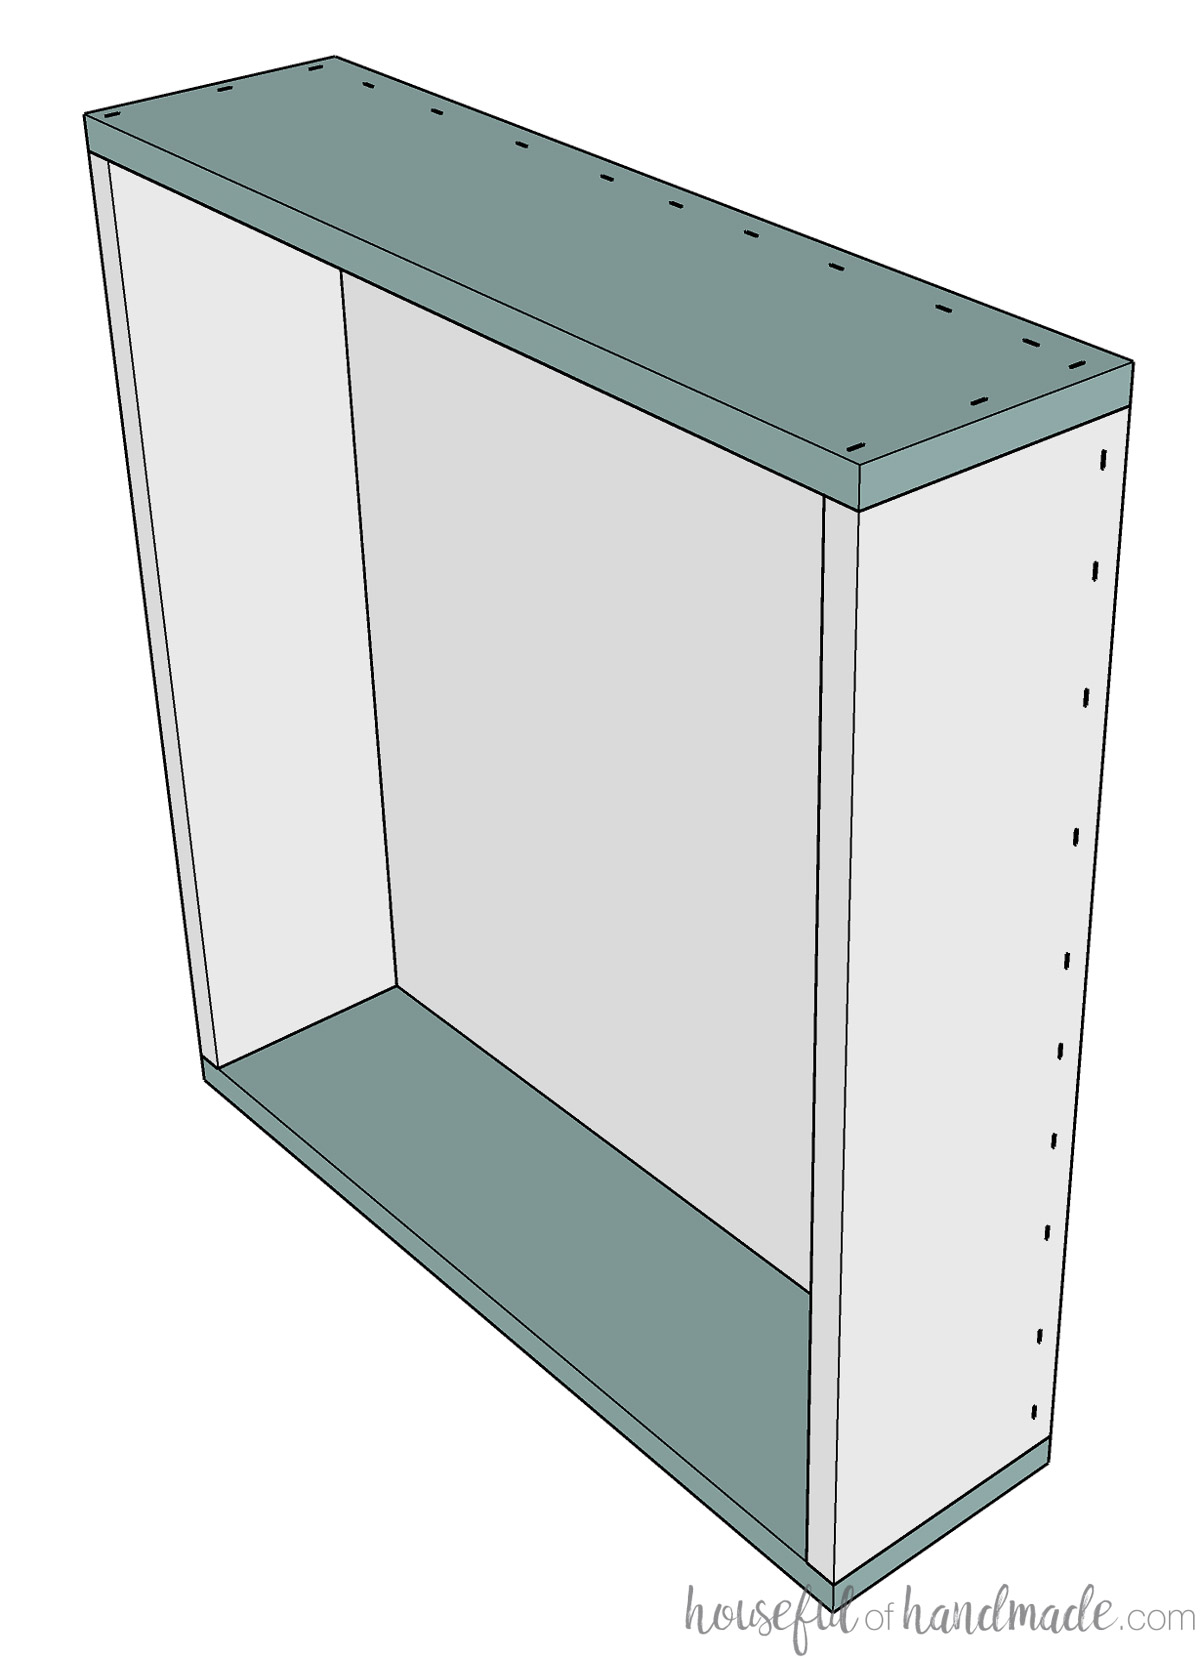 Drawing of attaching the top and bottom to the spice rack.